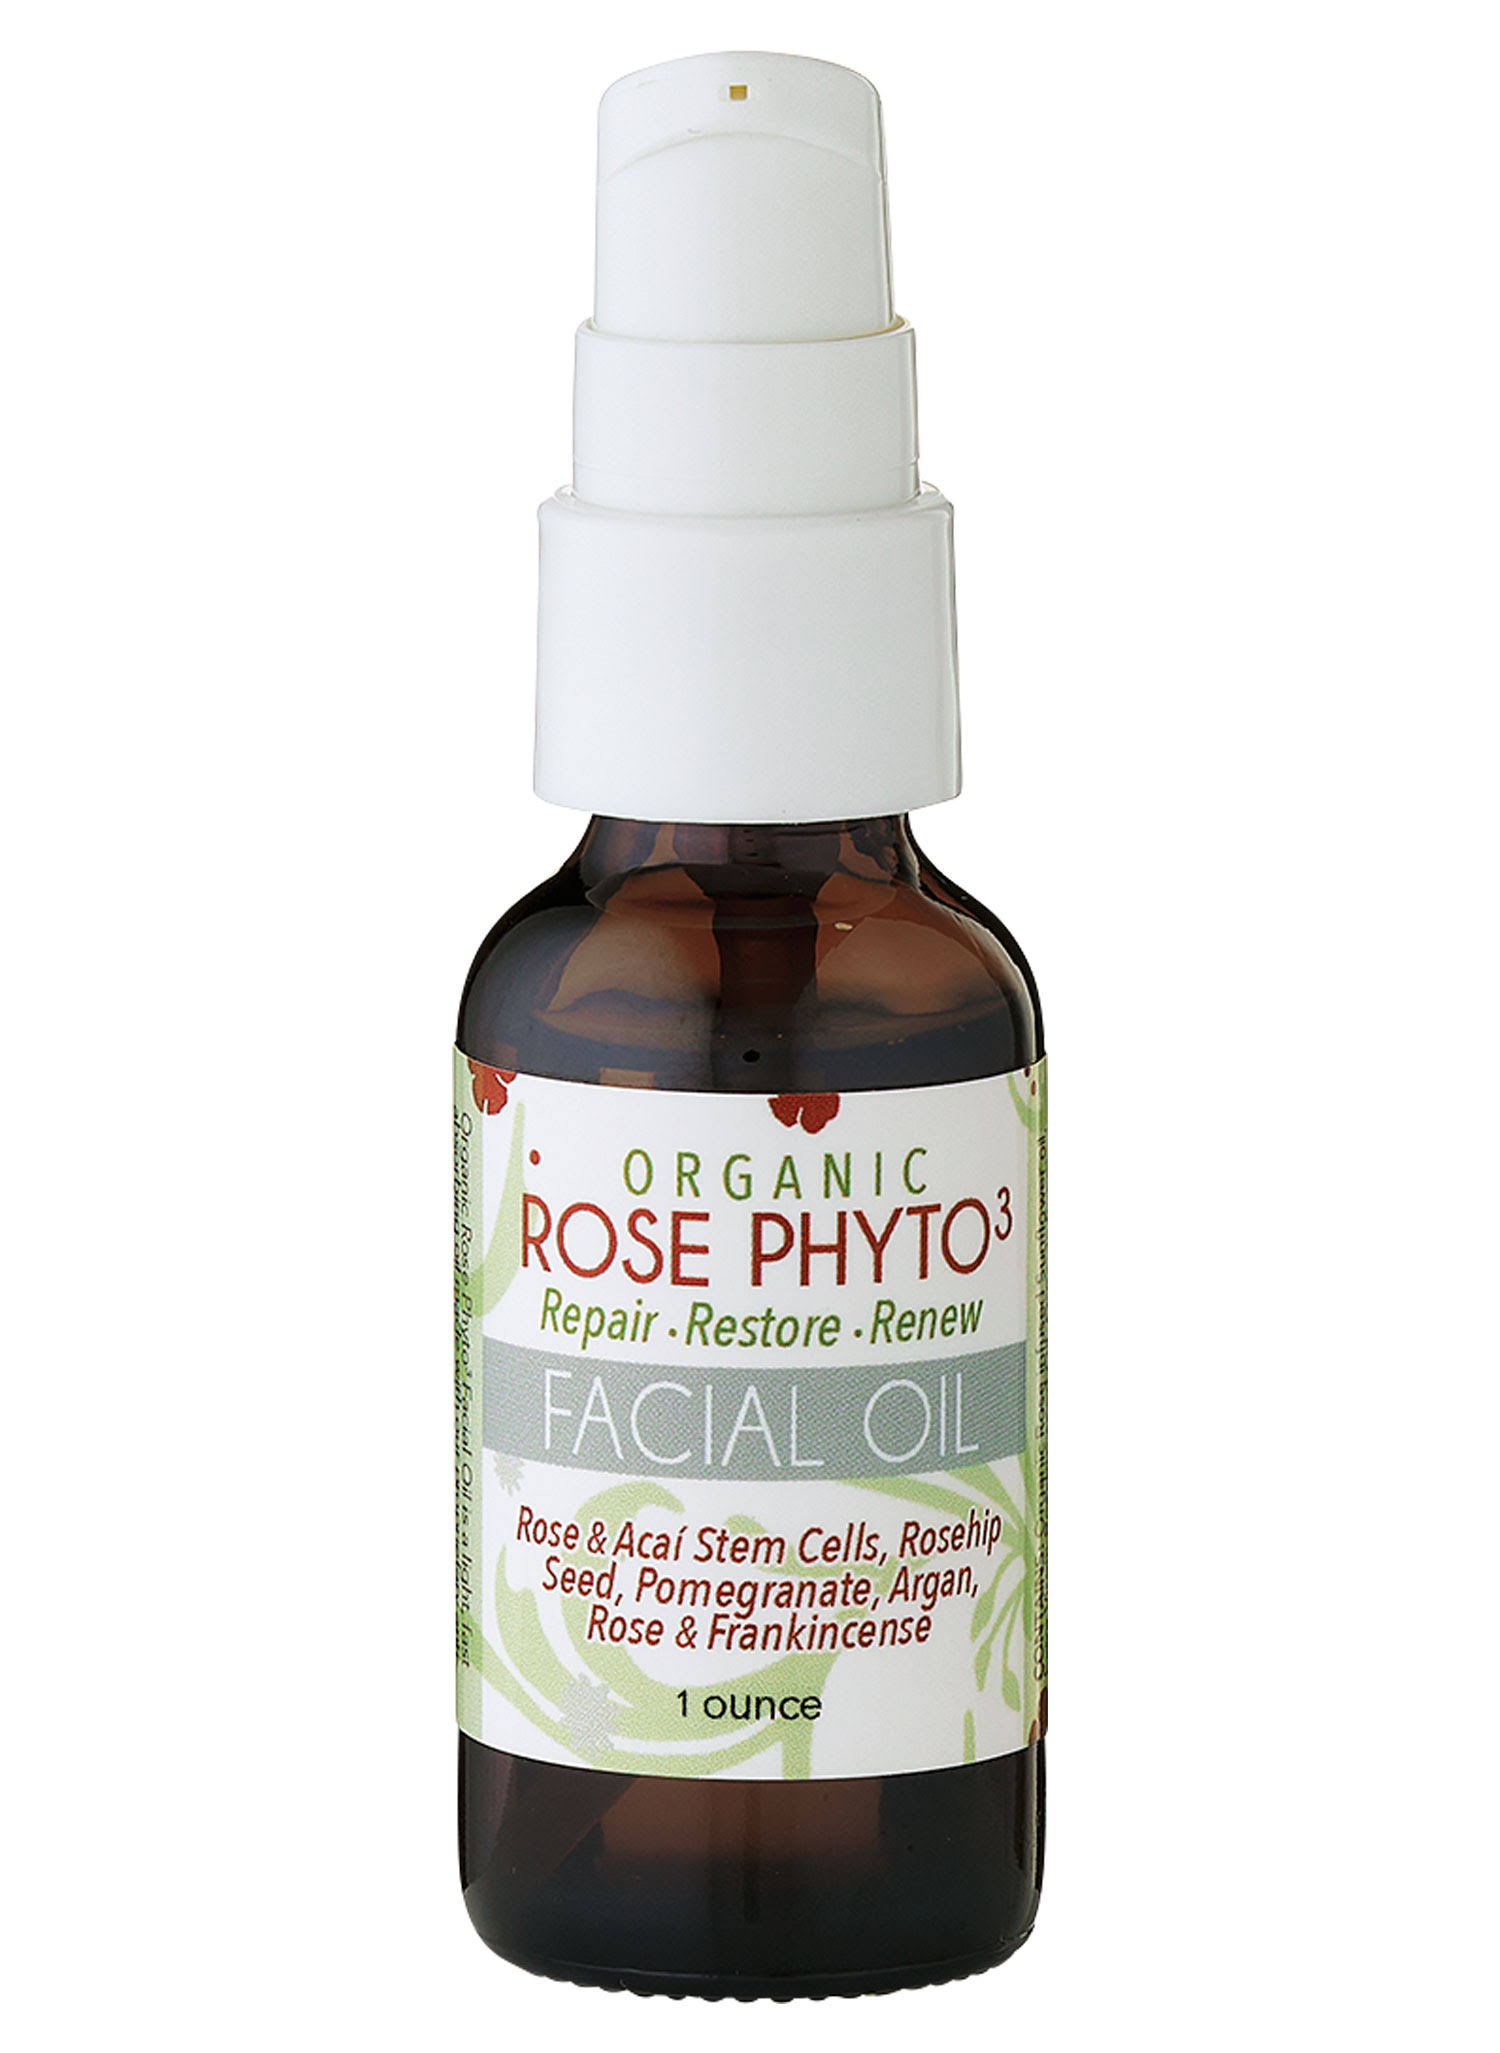 Organic Rose Phyto3 Facial Oil - 30ml Amber Glass -Hydrating Face Oil, Fast Absorbing great for Sensitive Skin - Cold Pressed Organic Oils